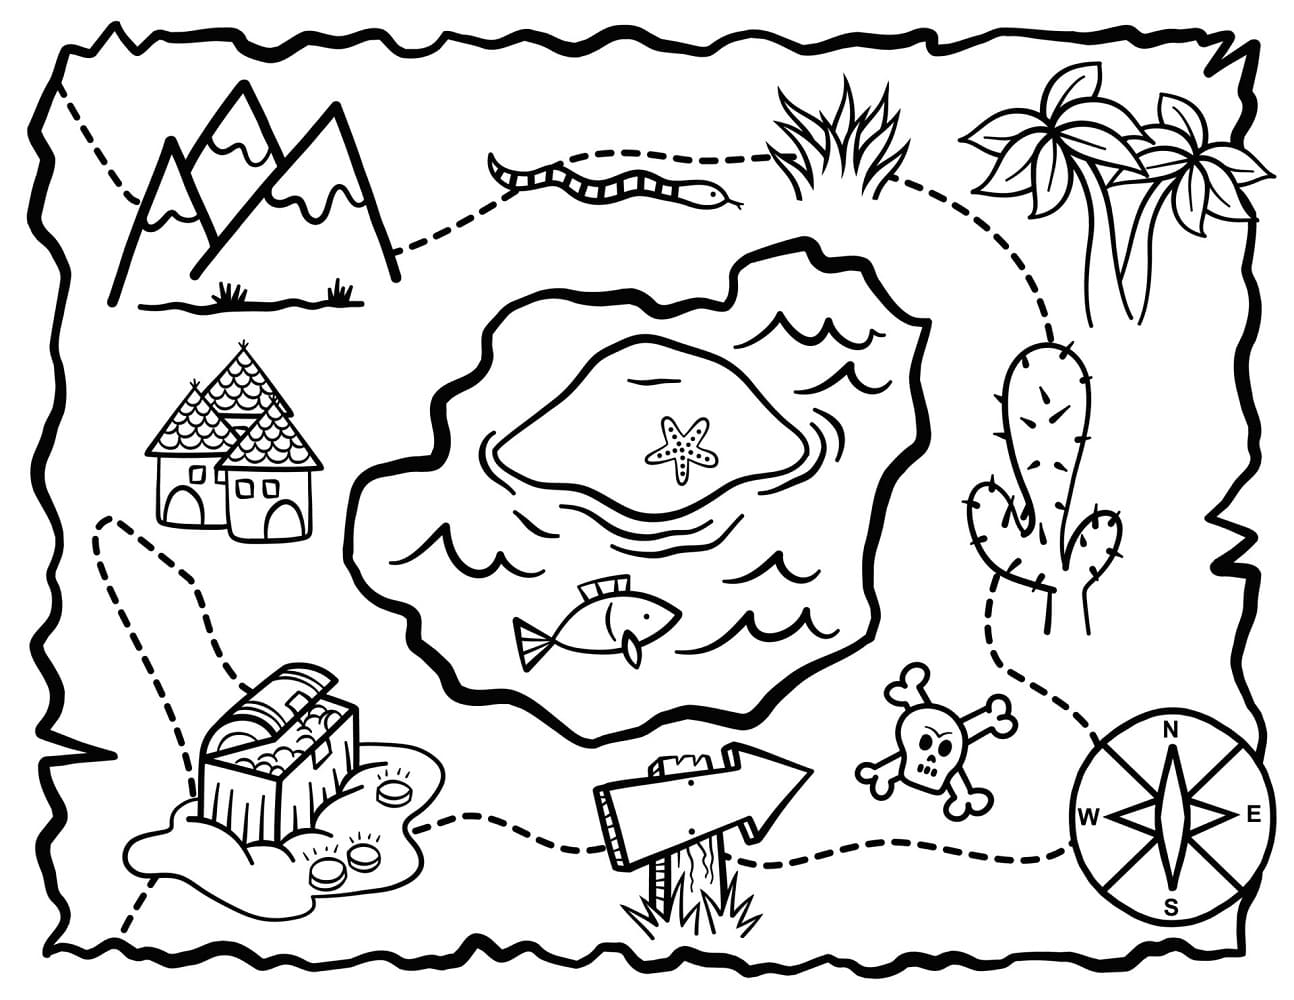 Treasure Map Coloring Pages Free Printable Coloring Pages For Kids